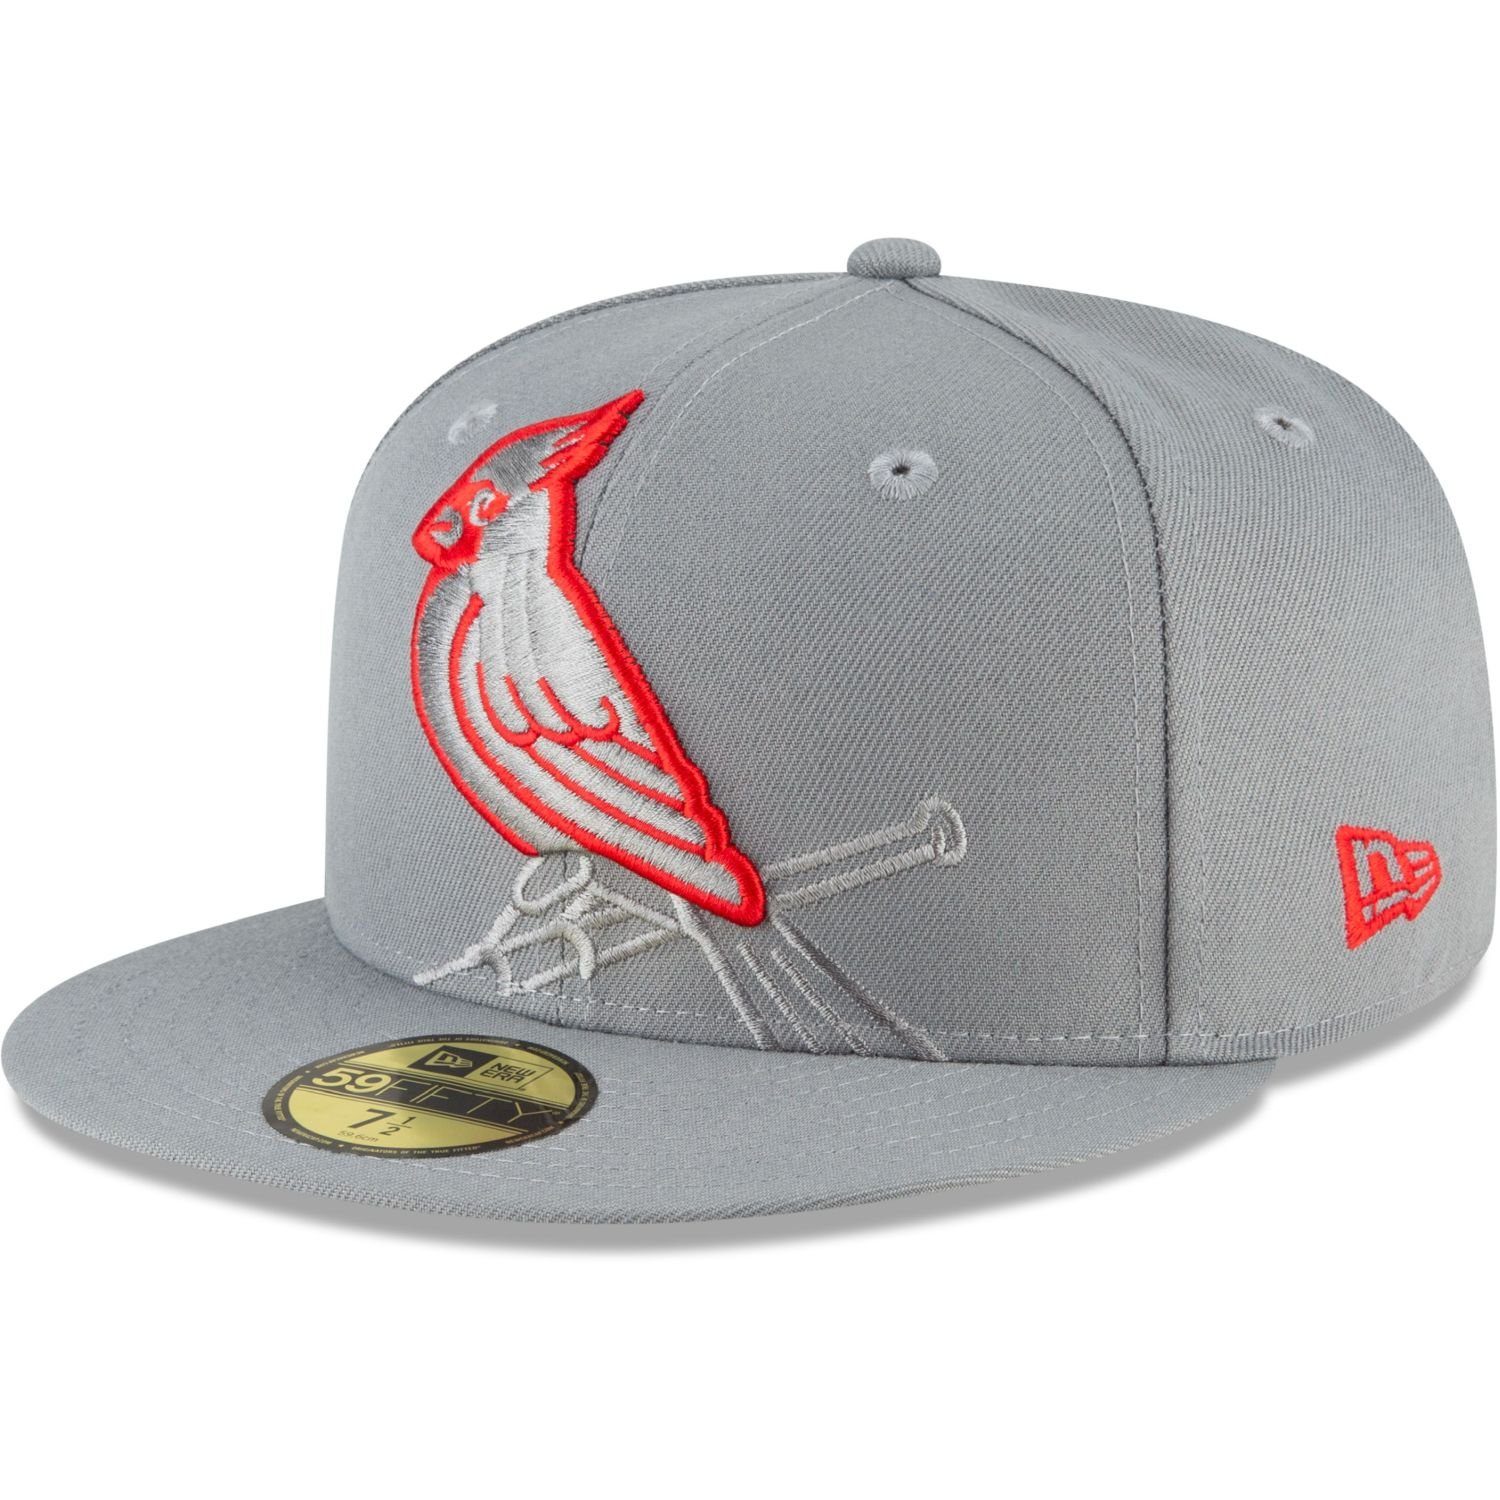 New Era Fitted Cap 59Fifty STORM GREY MLB Cooperstown Team St. Louis Cardinals